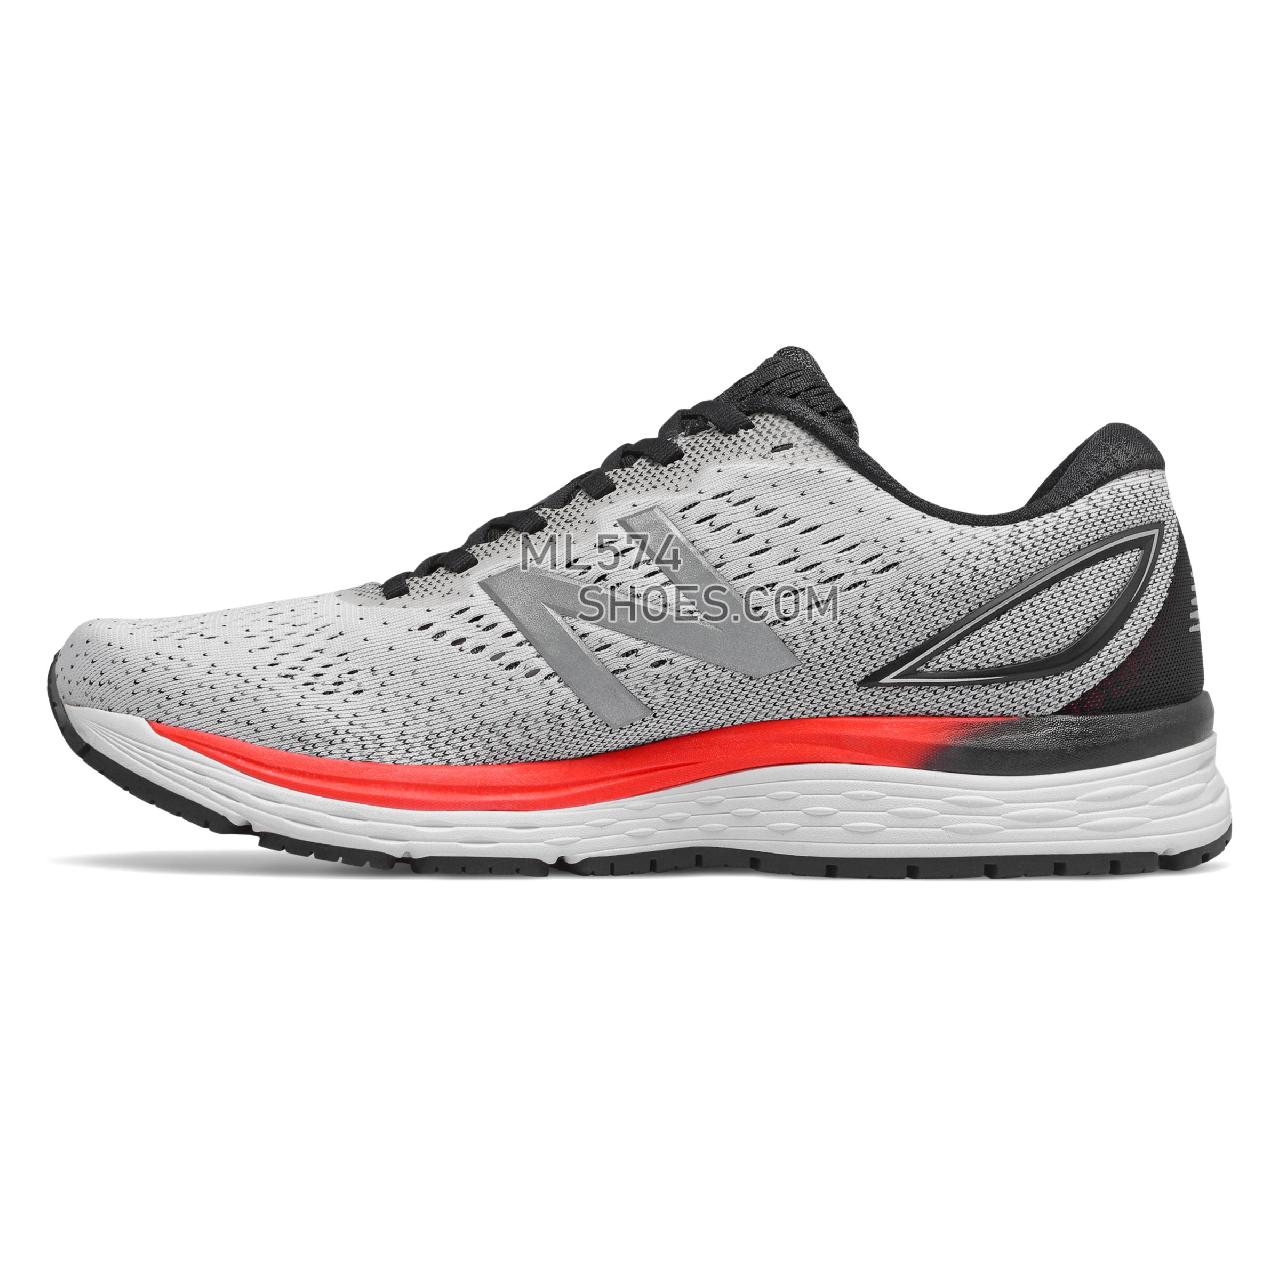 New Balance 880v9 - Men's Neutral Running - White with Black and Energy Red - M880WT9